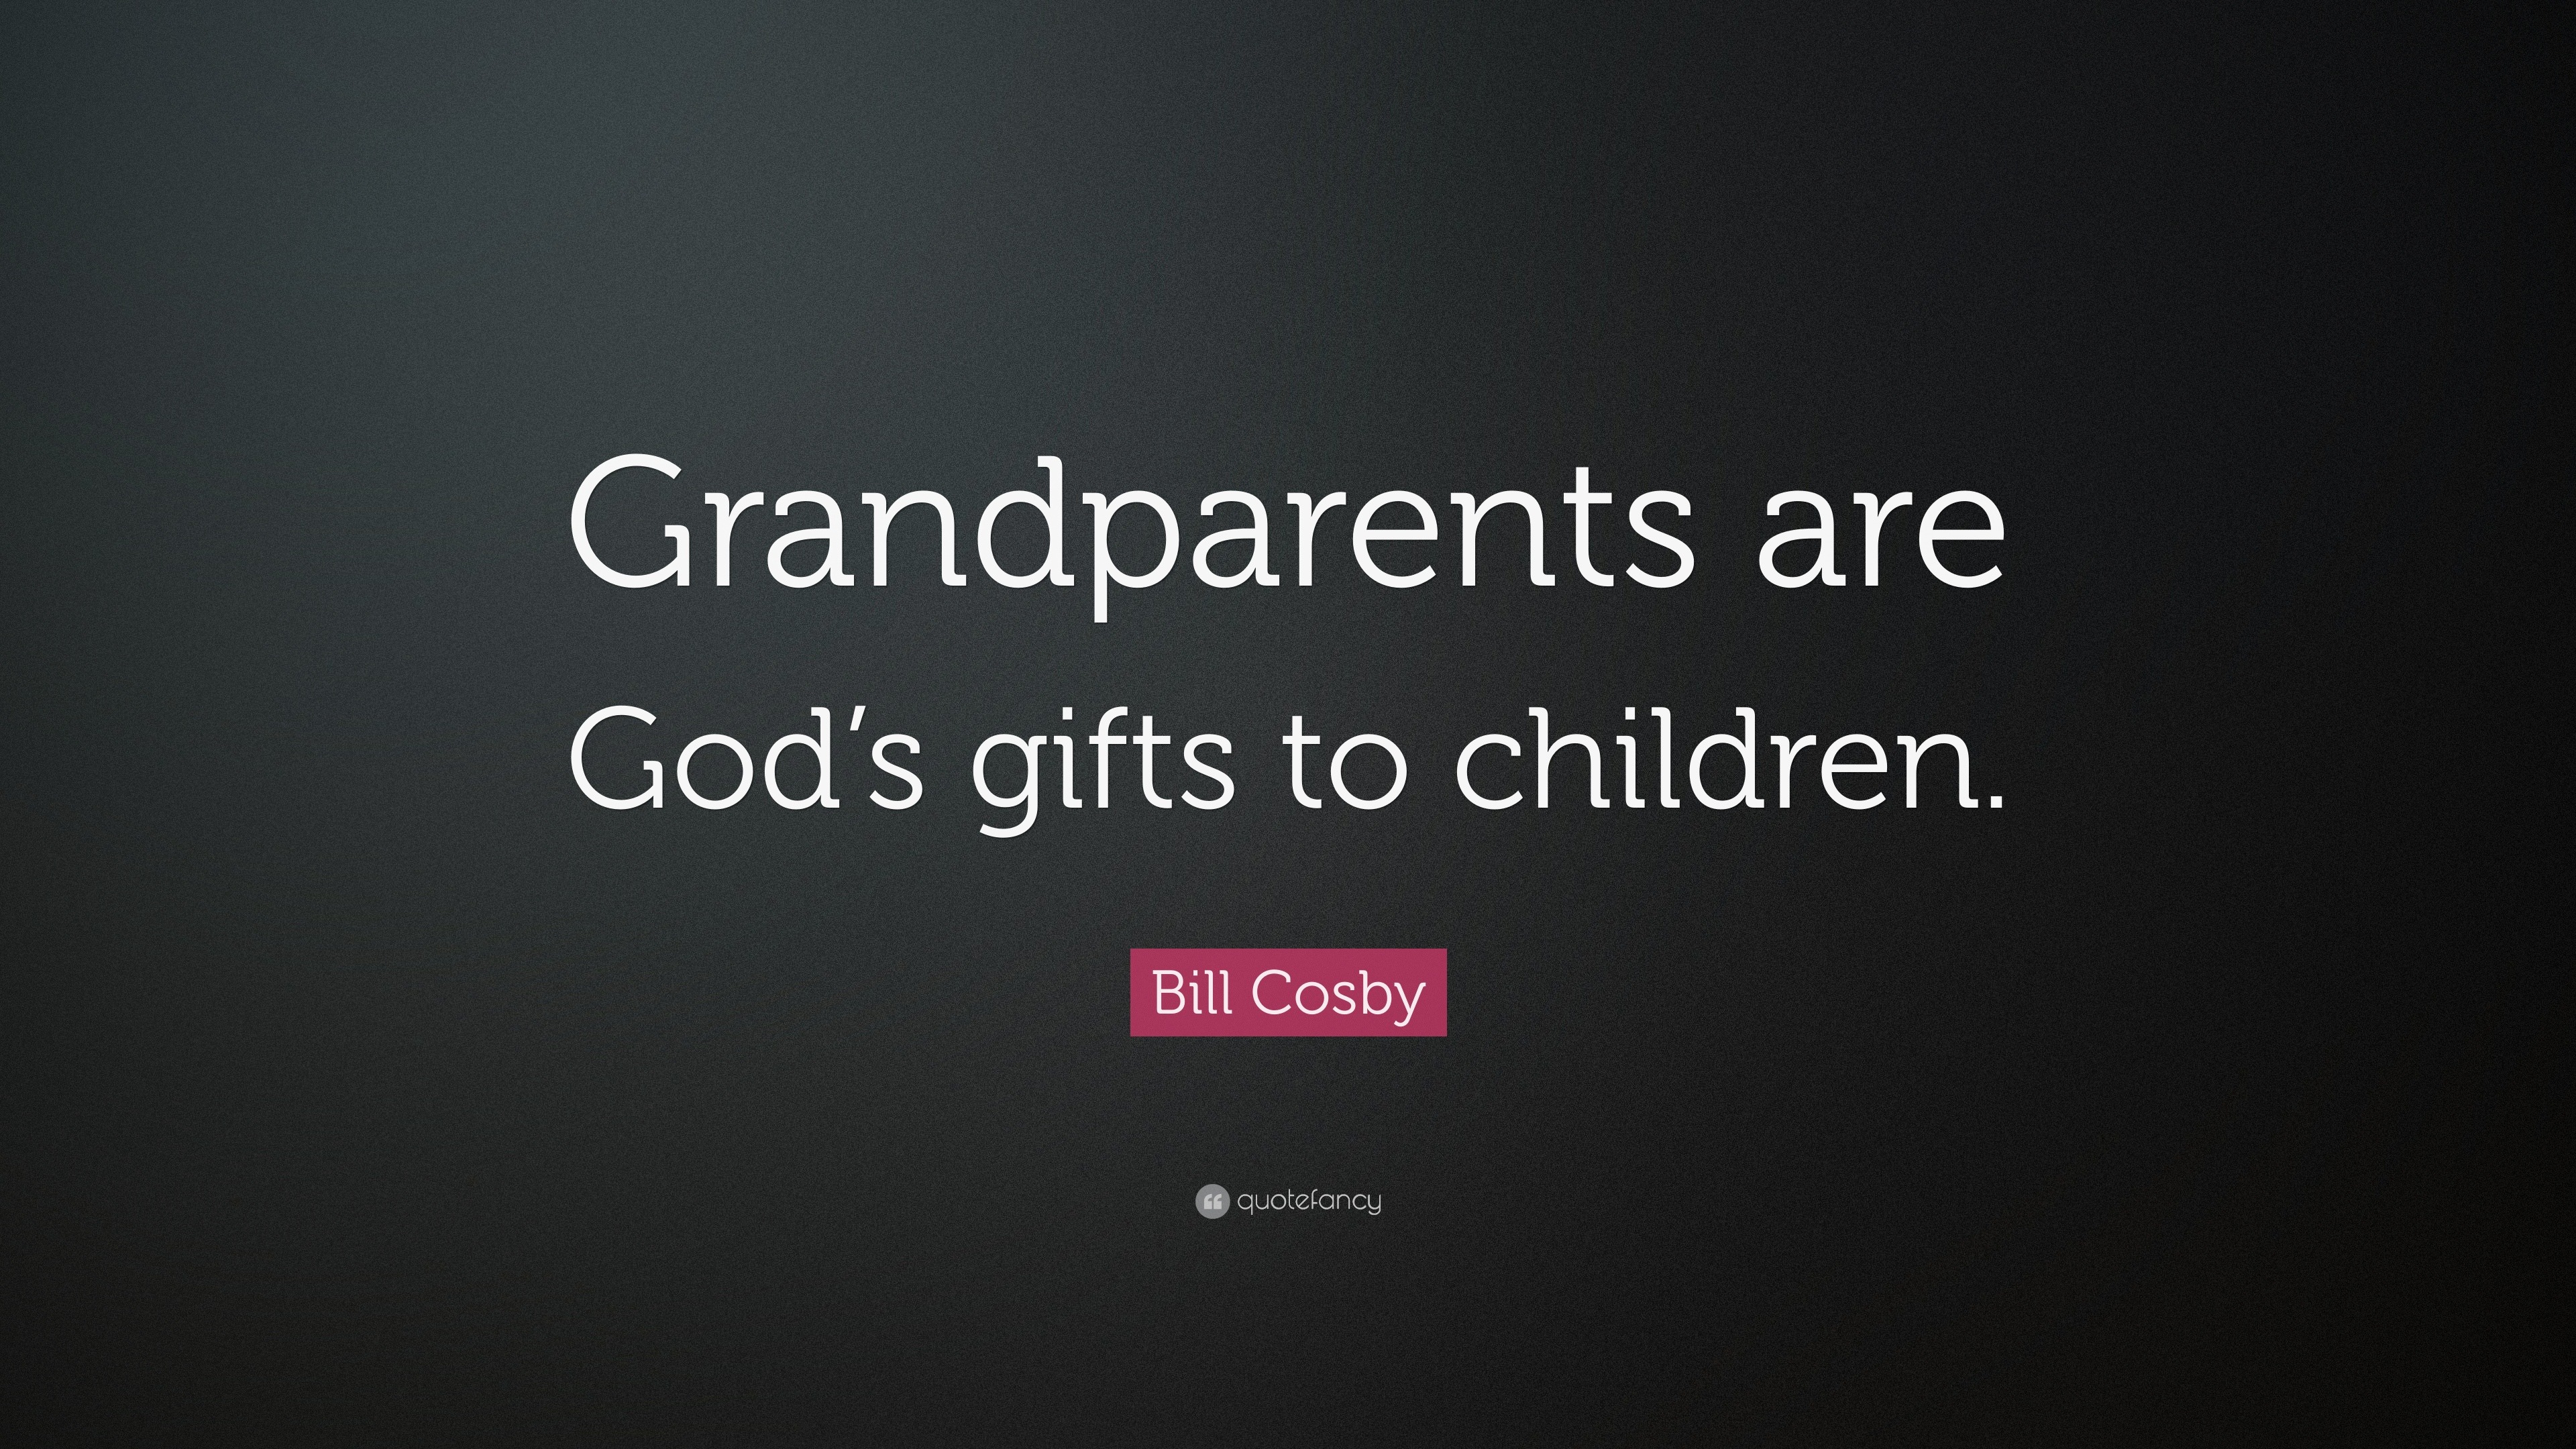 Bill Cosby Quote: “Grandparents are God’s gifts to children.”